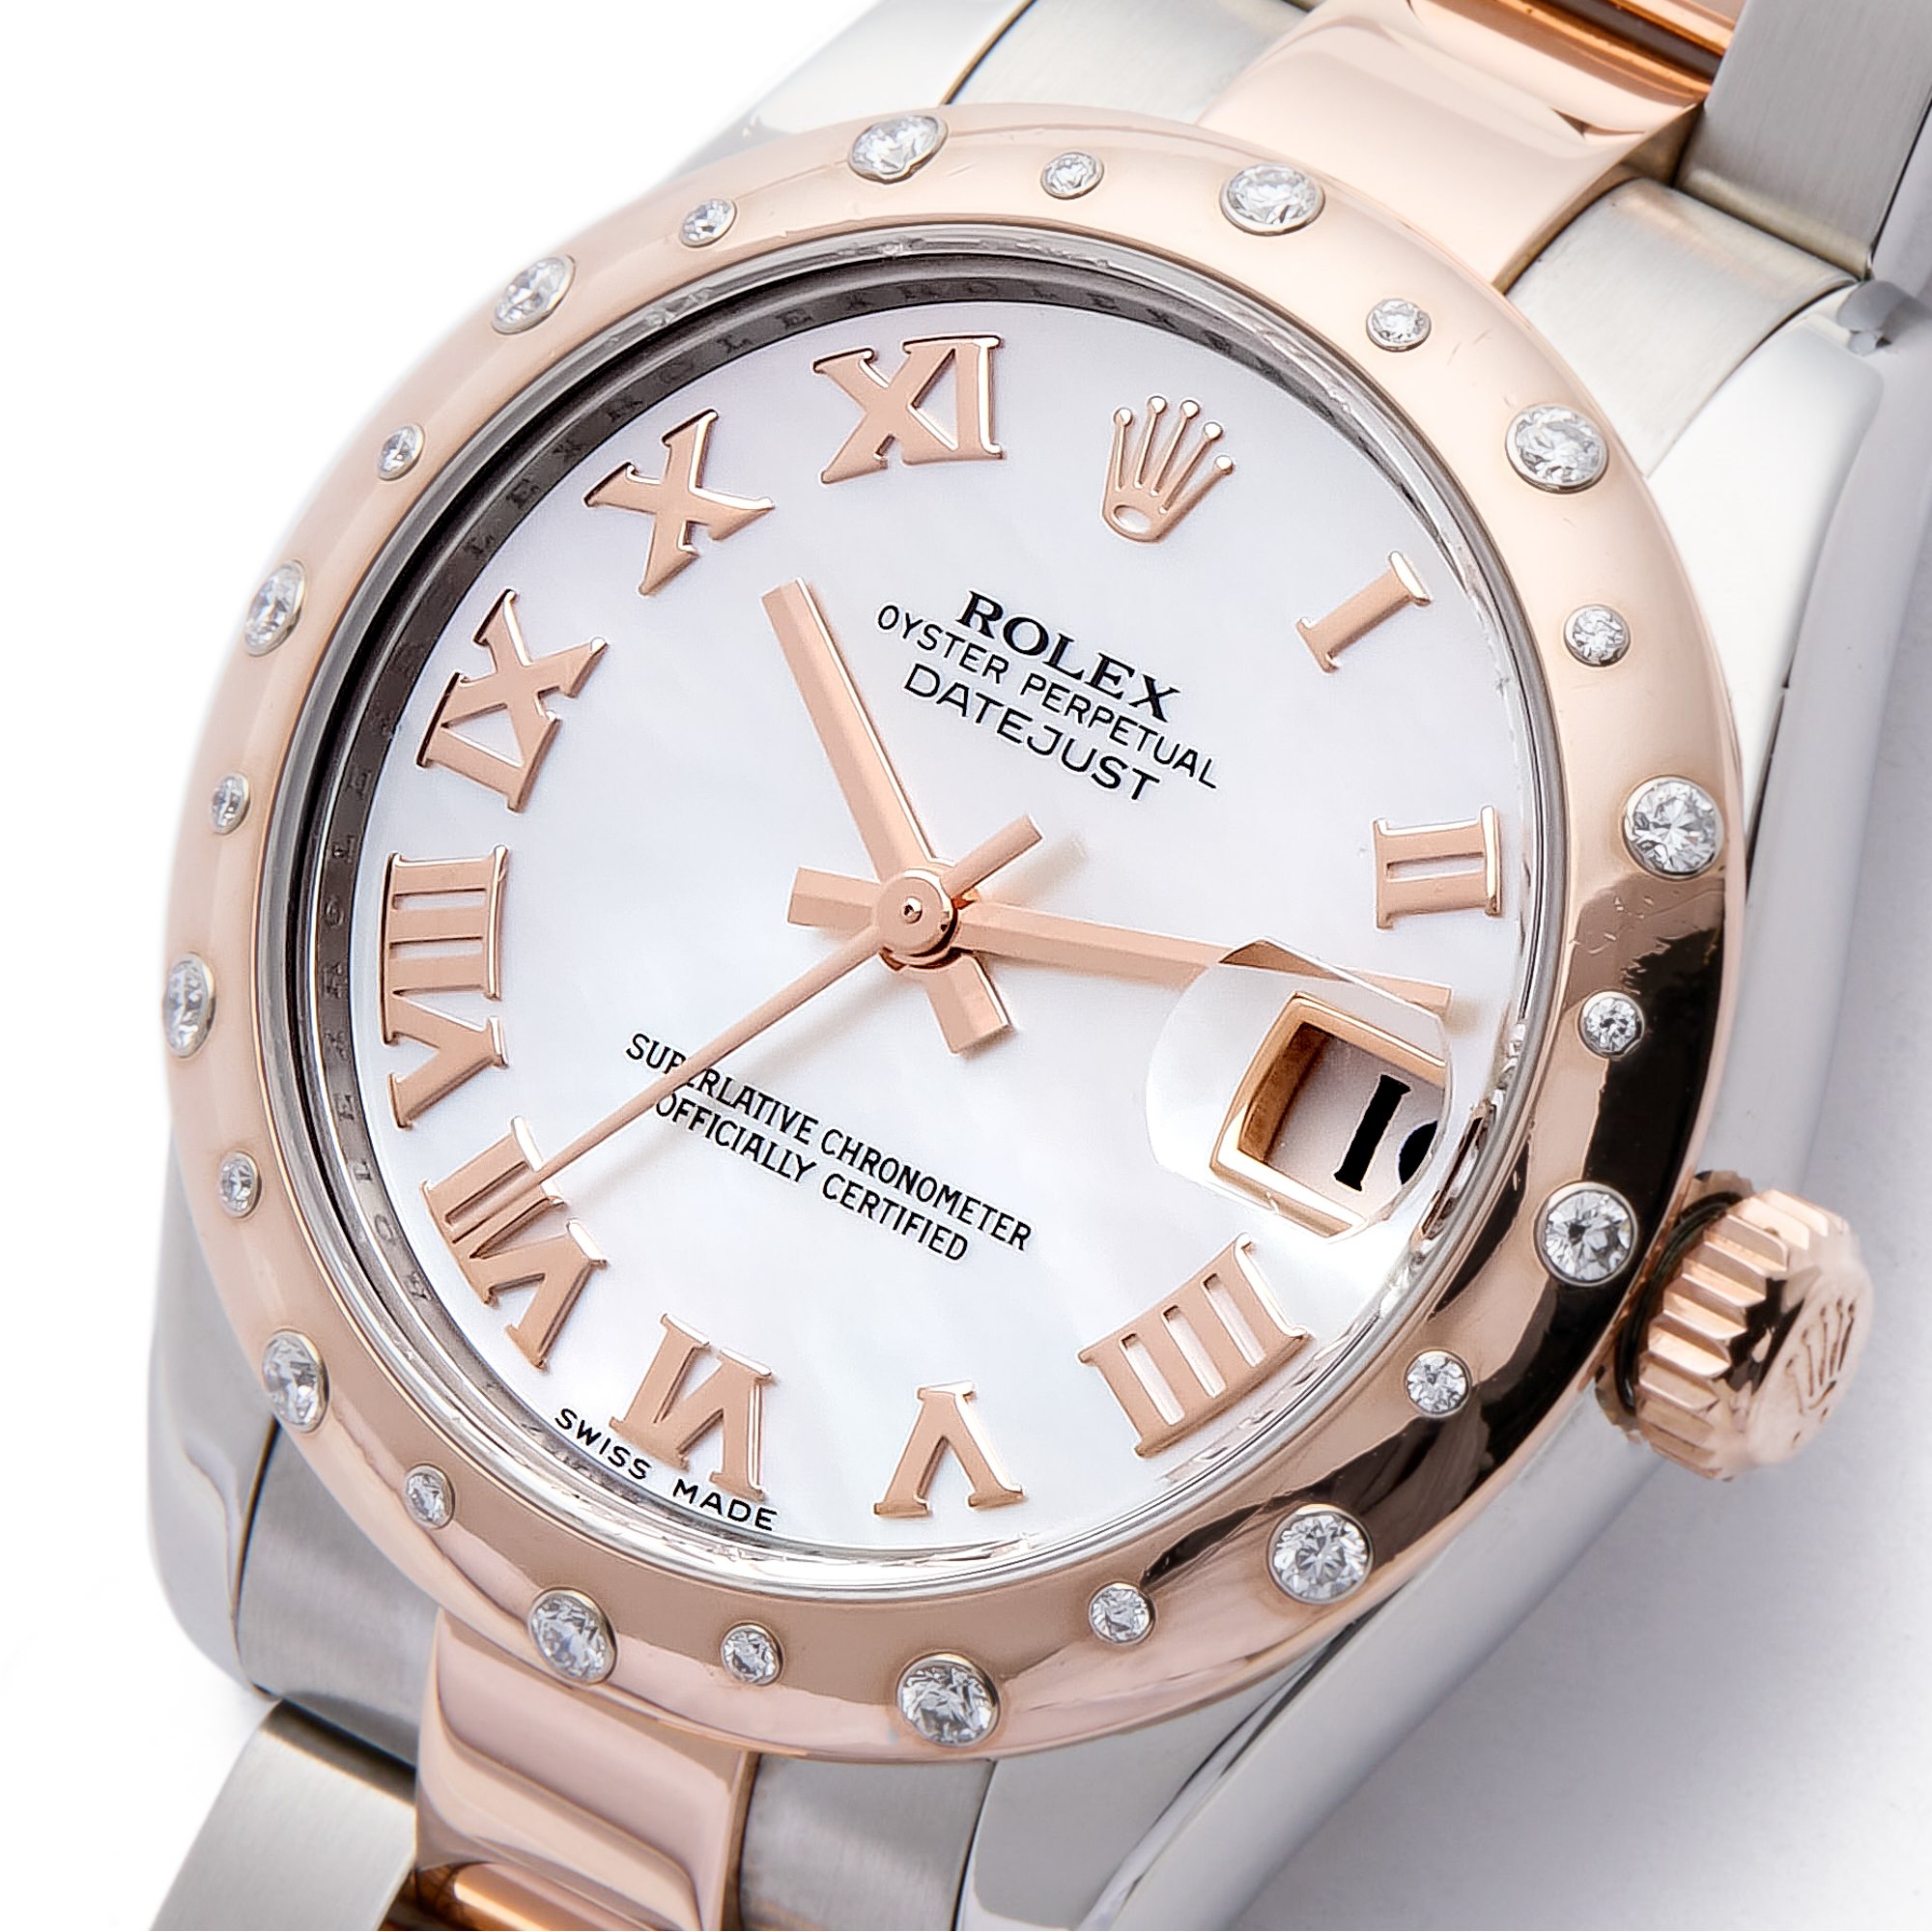 Rolex Datejust 31 Mother Of Pearl Rose Gold & Stainless Steel 178341